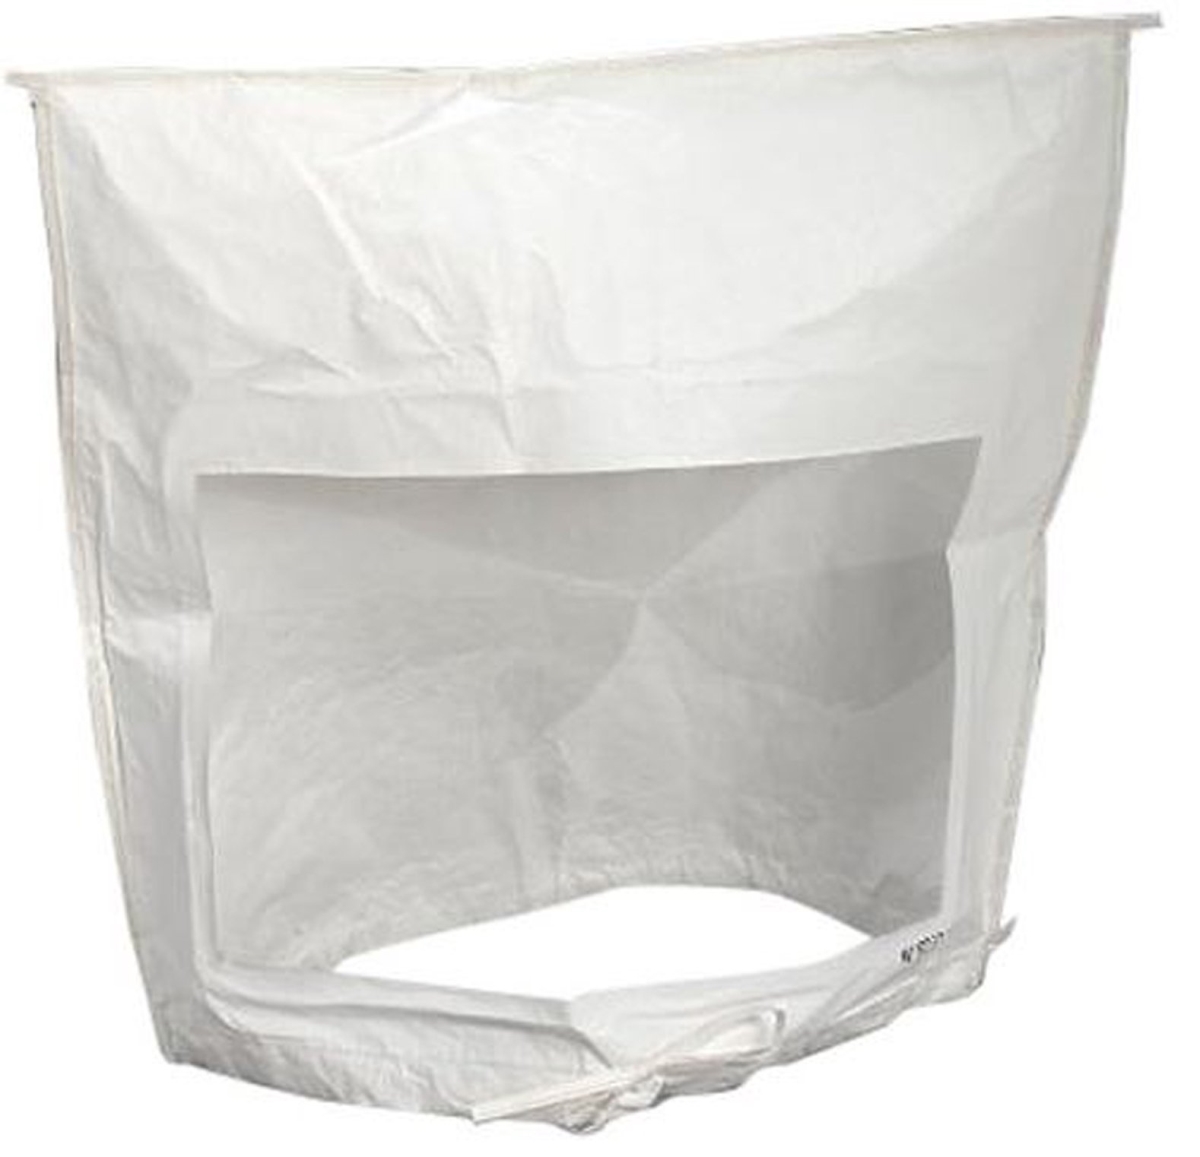 Picture of 3M 57663900 Test Hood - Pack of 2